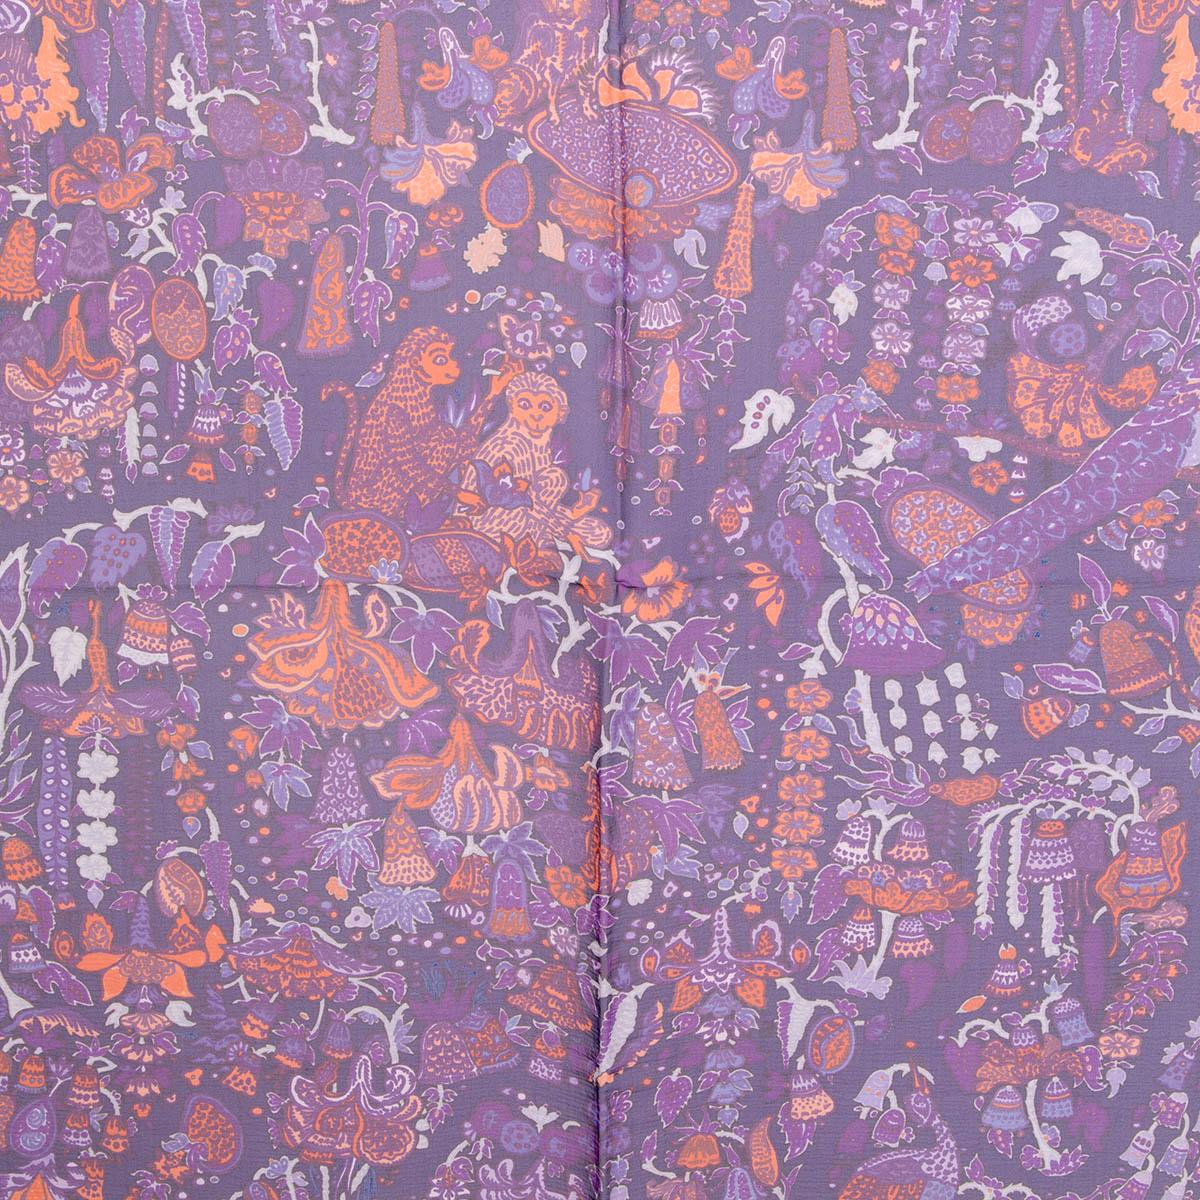 100% authentic Hermès Legende Moghole 140 Mousseline scarf in purple silk chiffon (100%) with details in orange, lilac and white. Has been worn and is in excellent condition. 

Design 2008 by Karen Petrossian

Measurements
Width	140cm